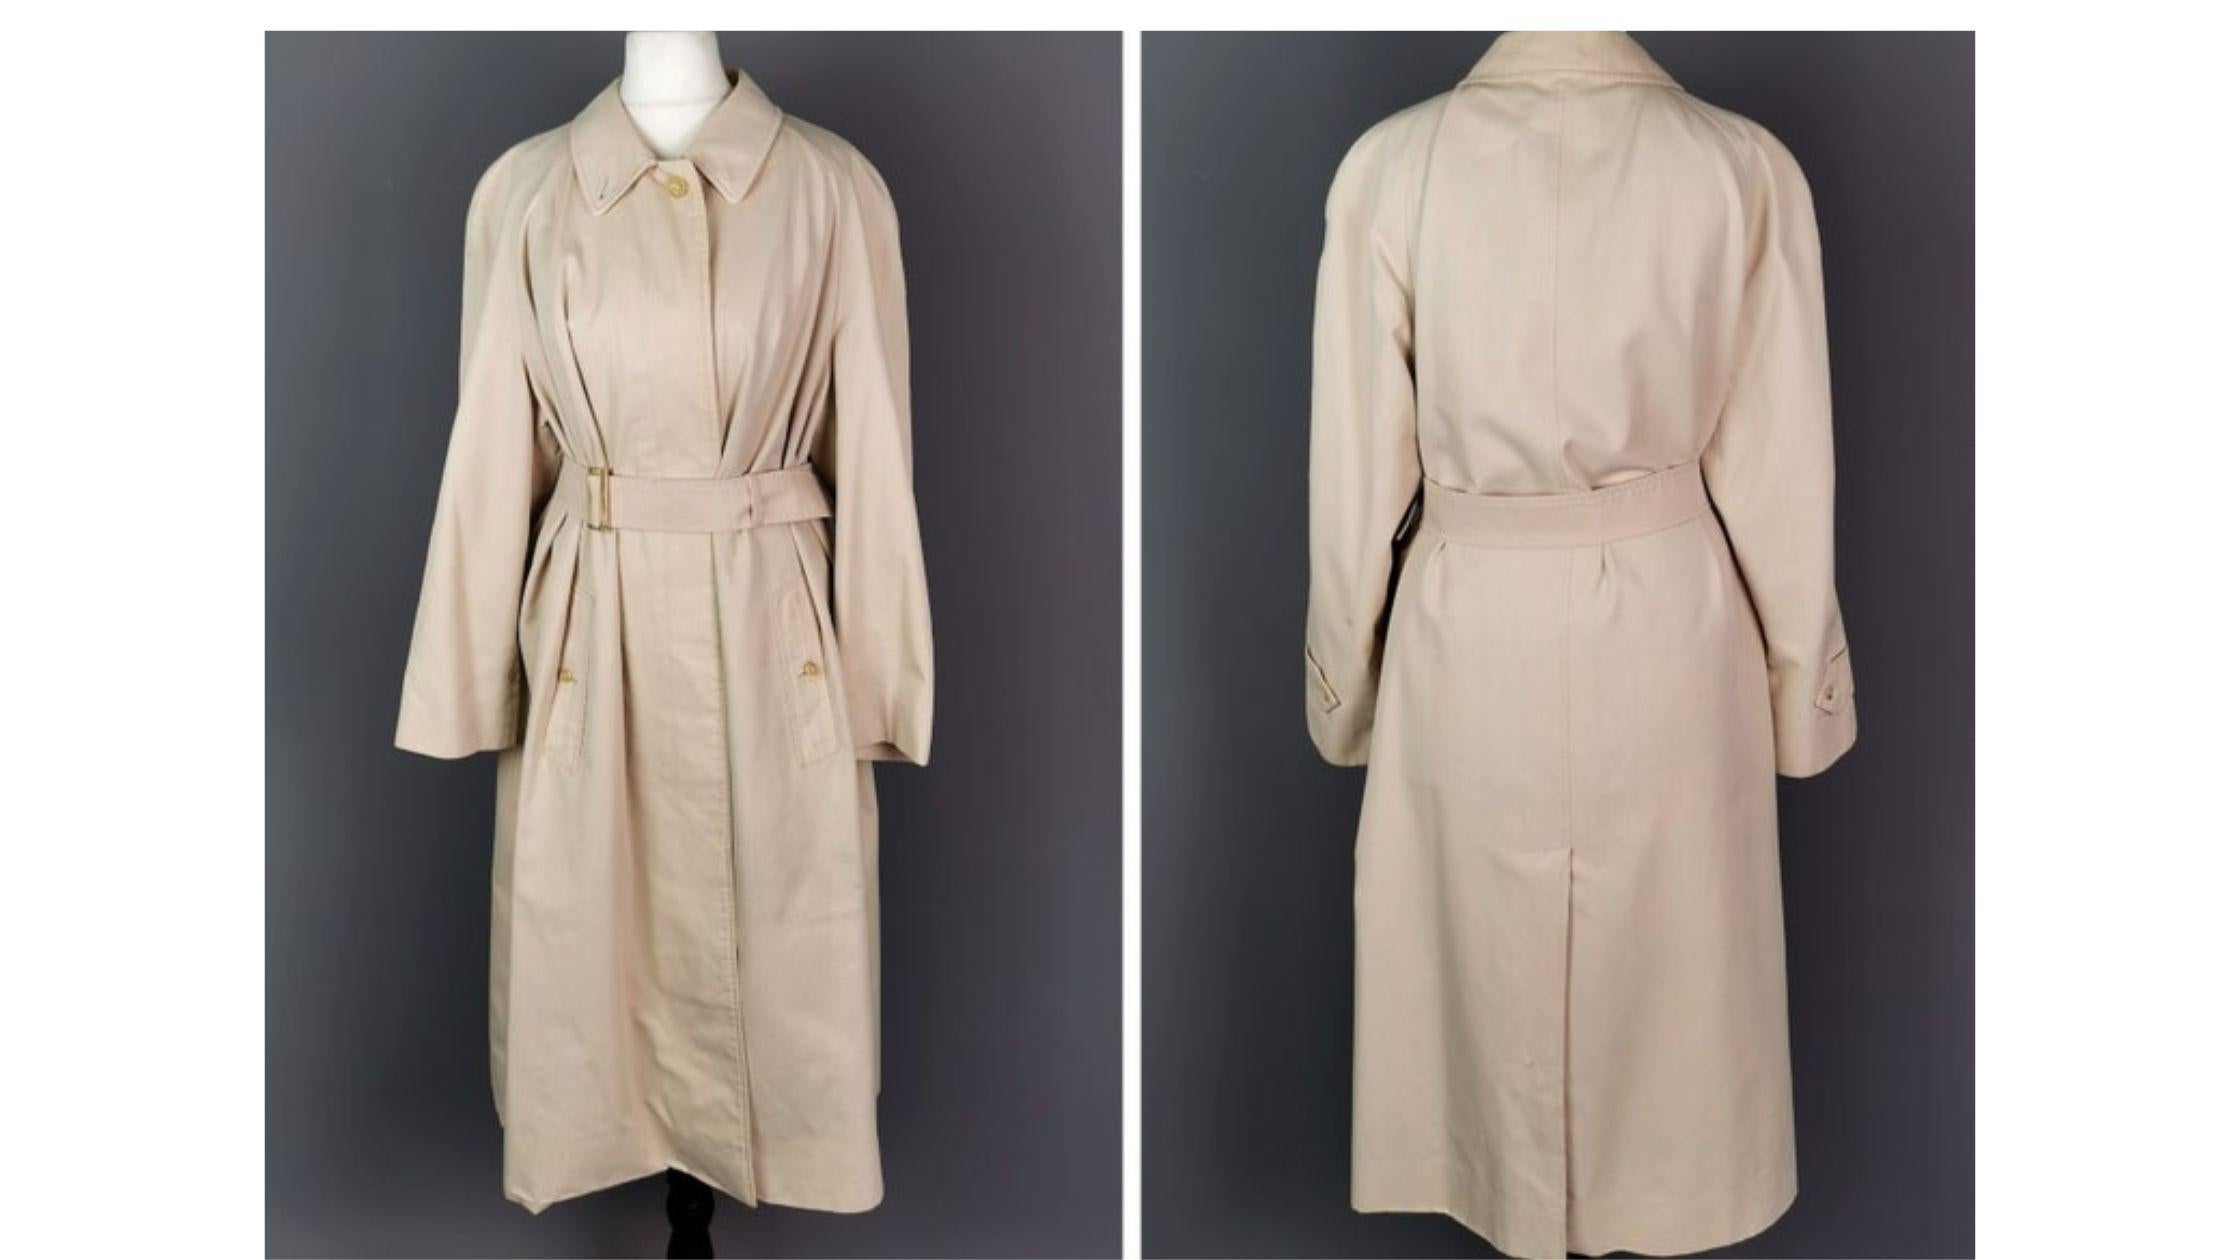 A stunning and iconic vintage Burberry trench coat.

This is a ladies trench coat, light beige with a classic Burberry Nova check lining.

It fastens with a marbled plastic button fastening and comes with a separate waist belt.

Labelled Burberry